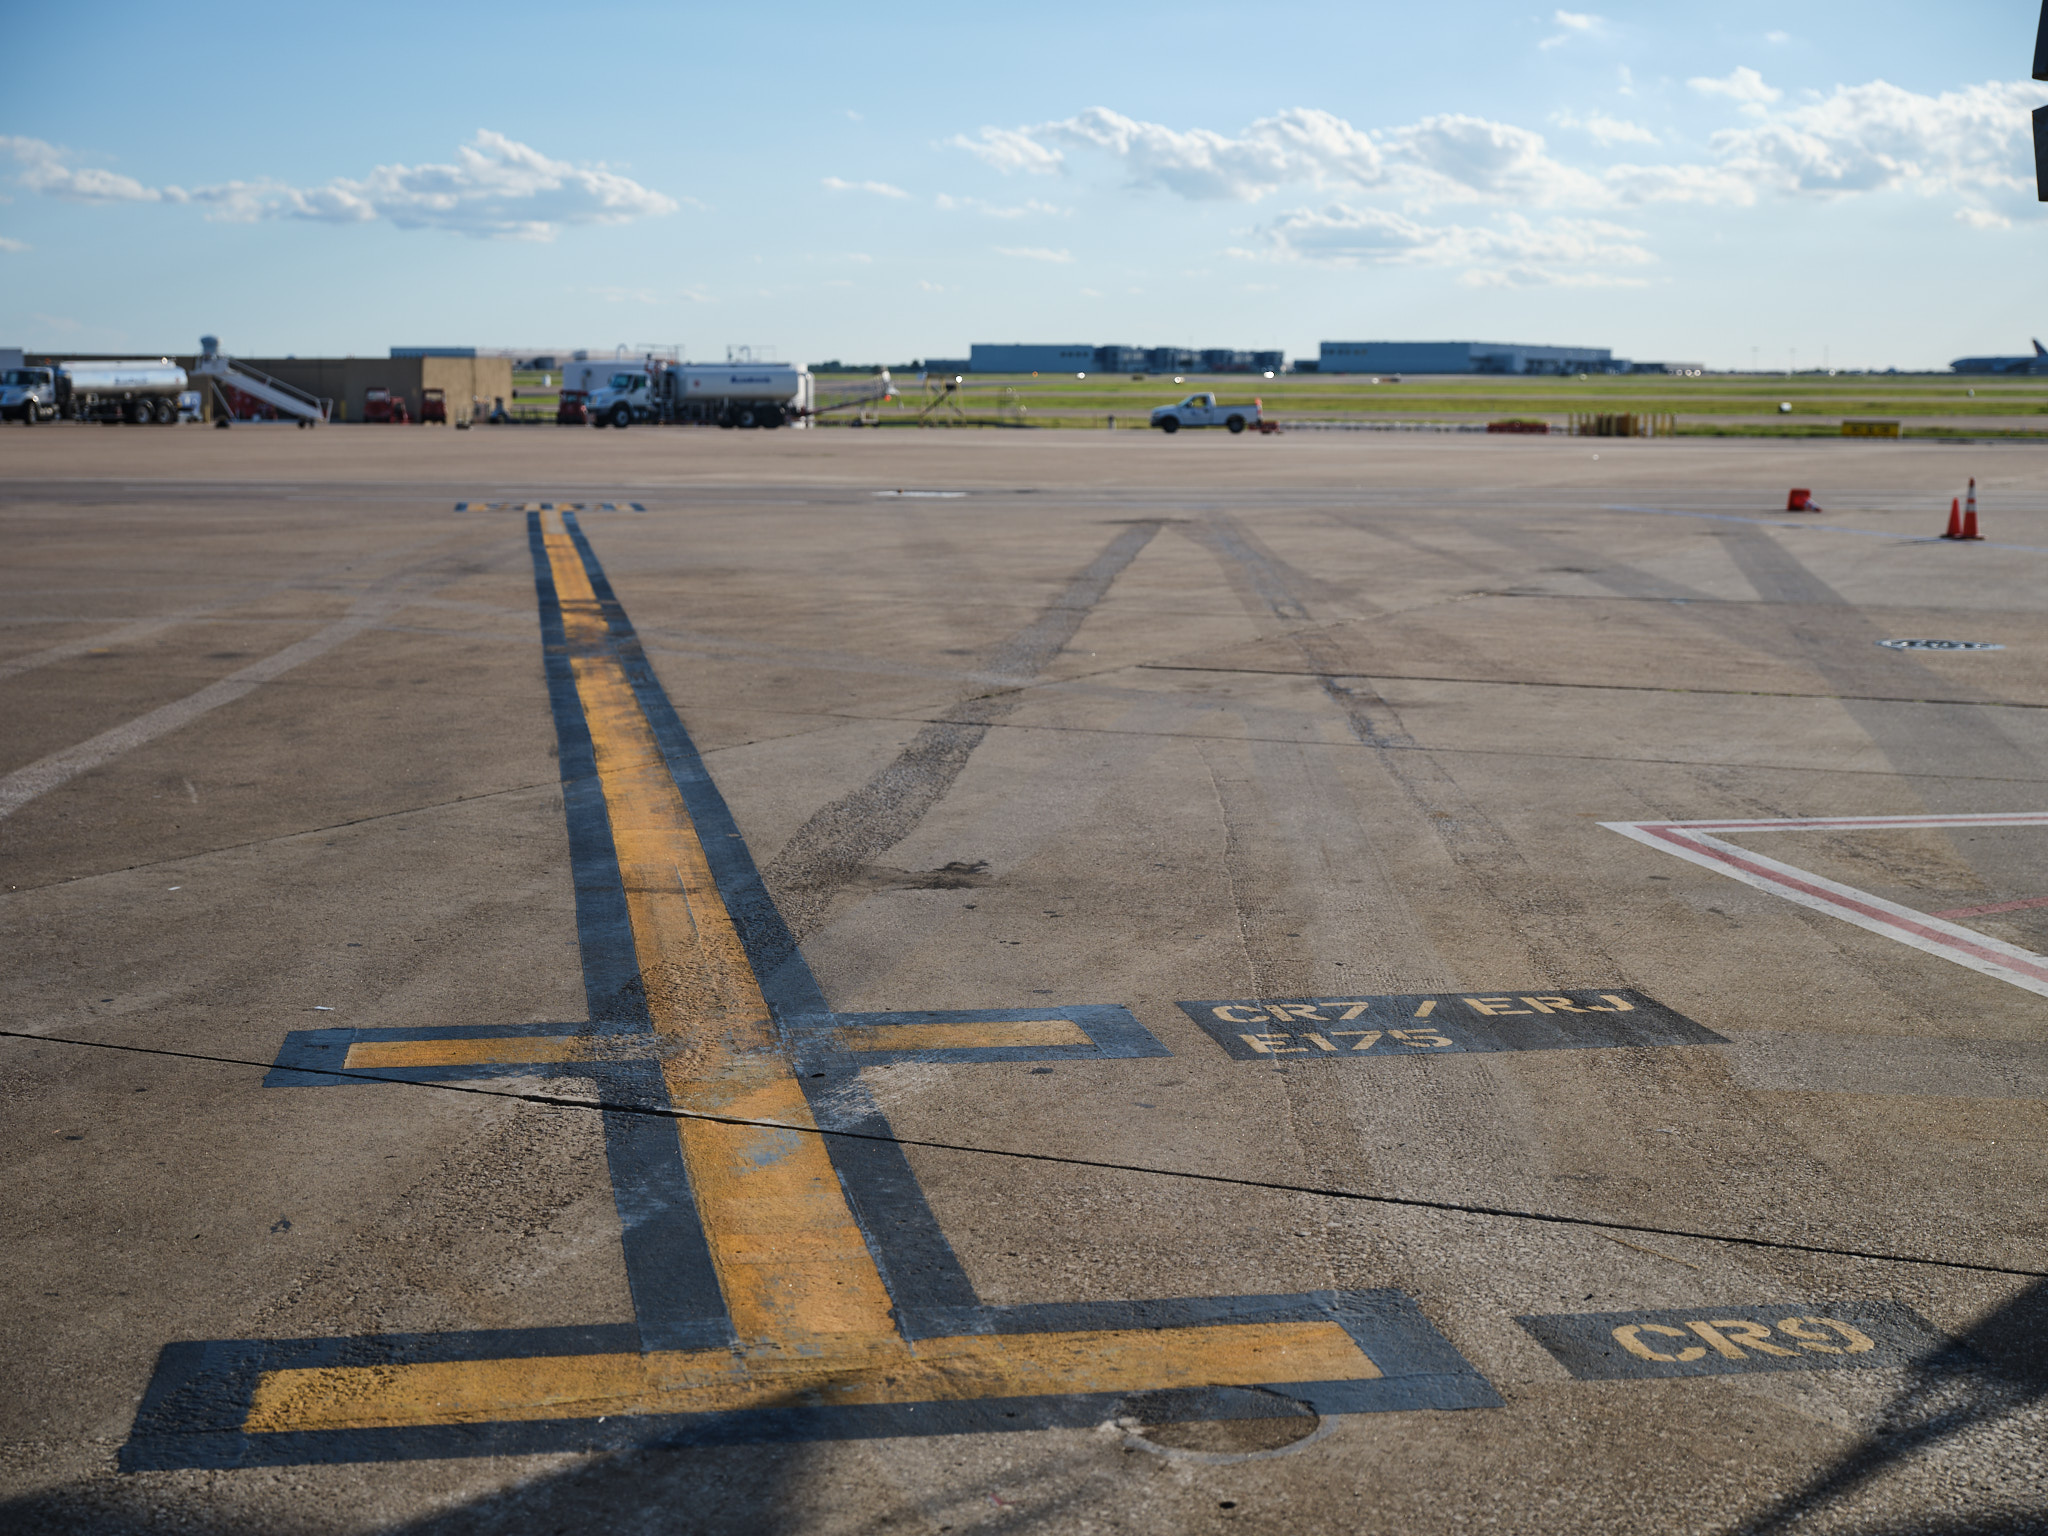 a runway with yellow lines painted on it